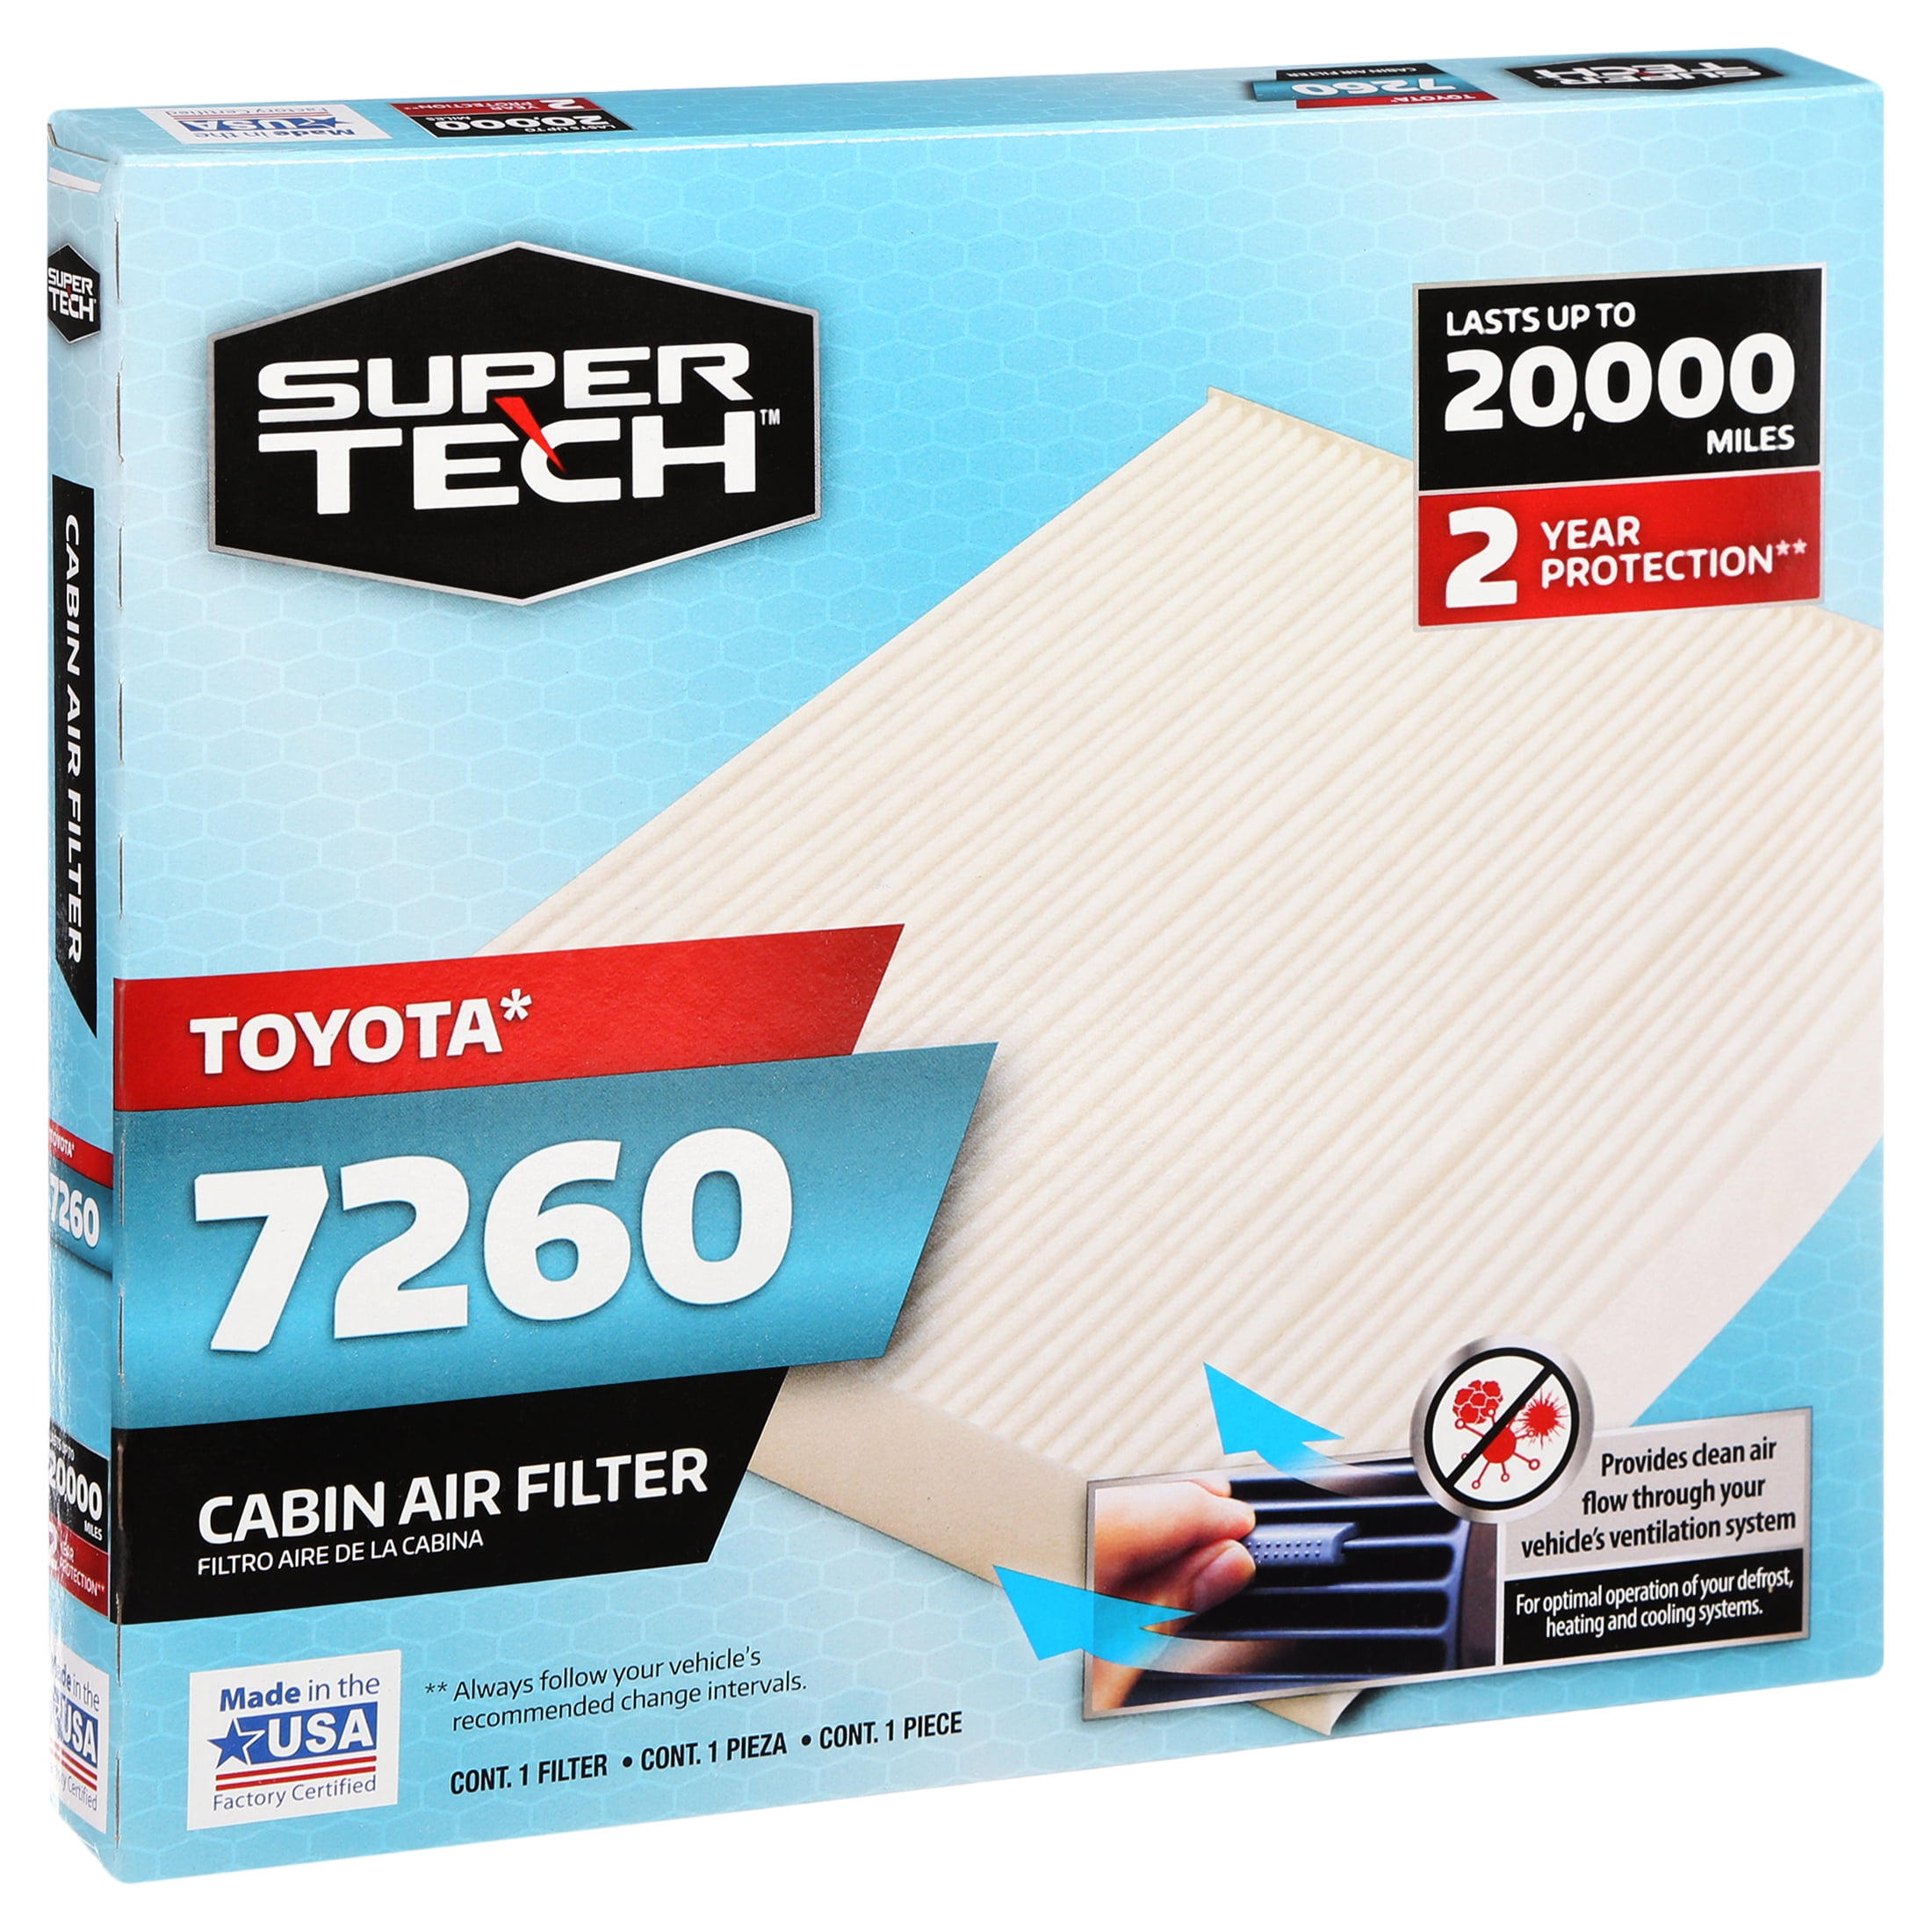 Toyota Cabin Air Filter Replacement